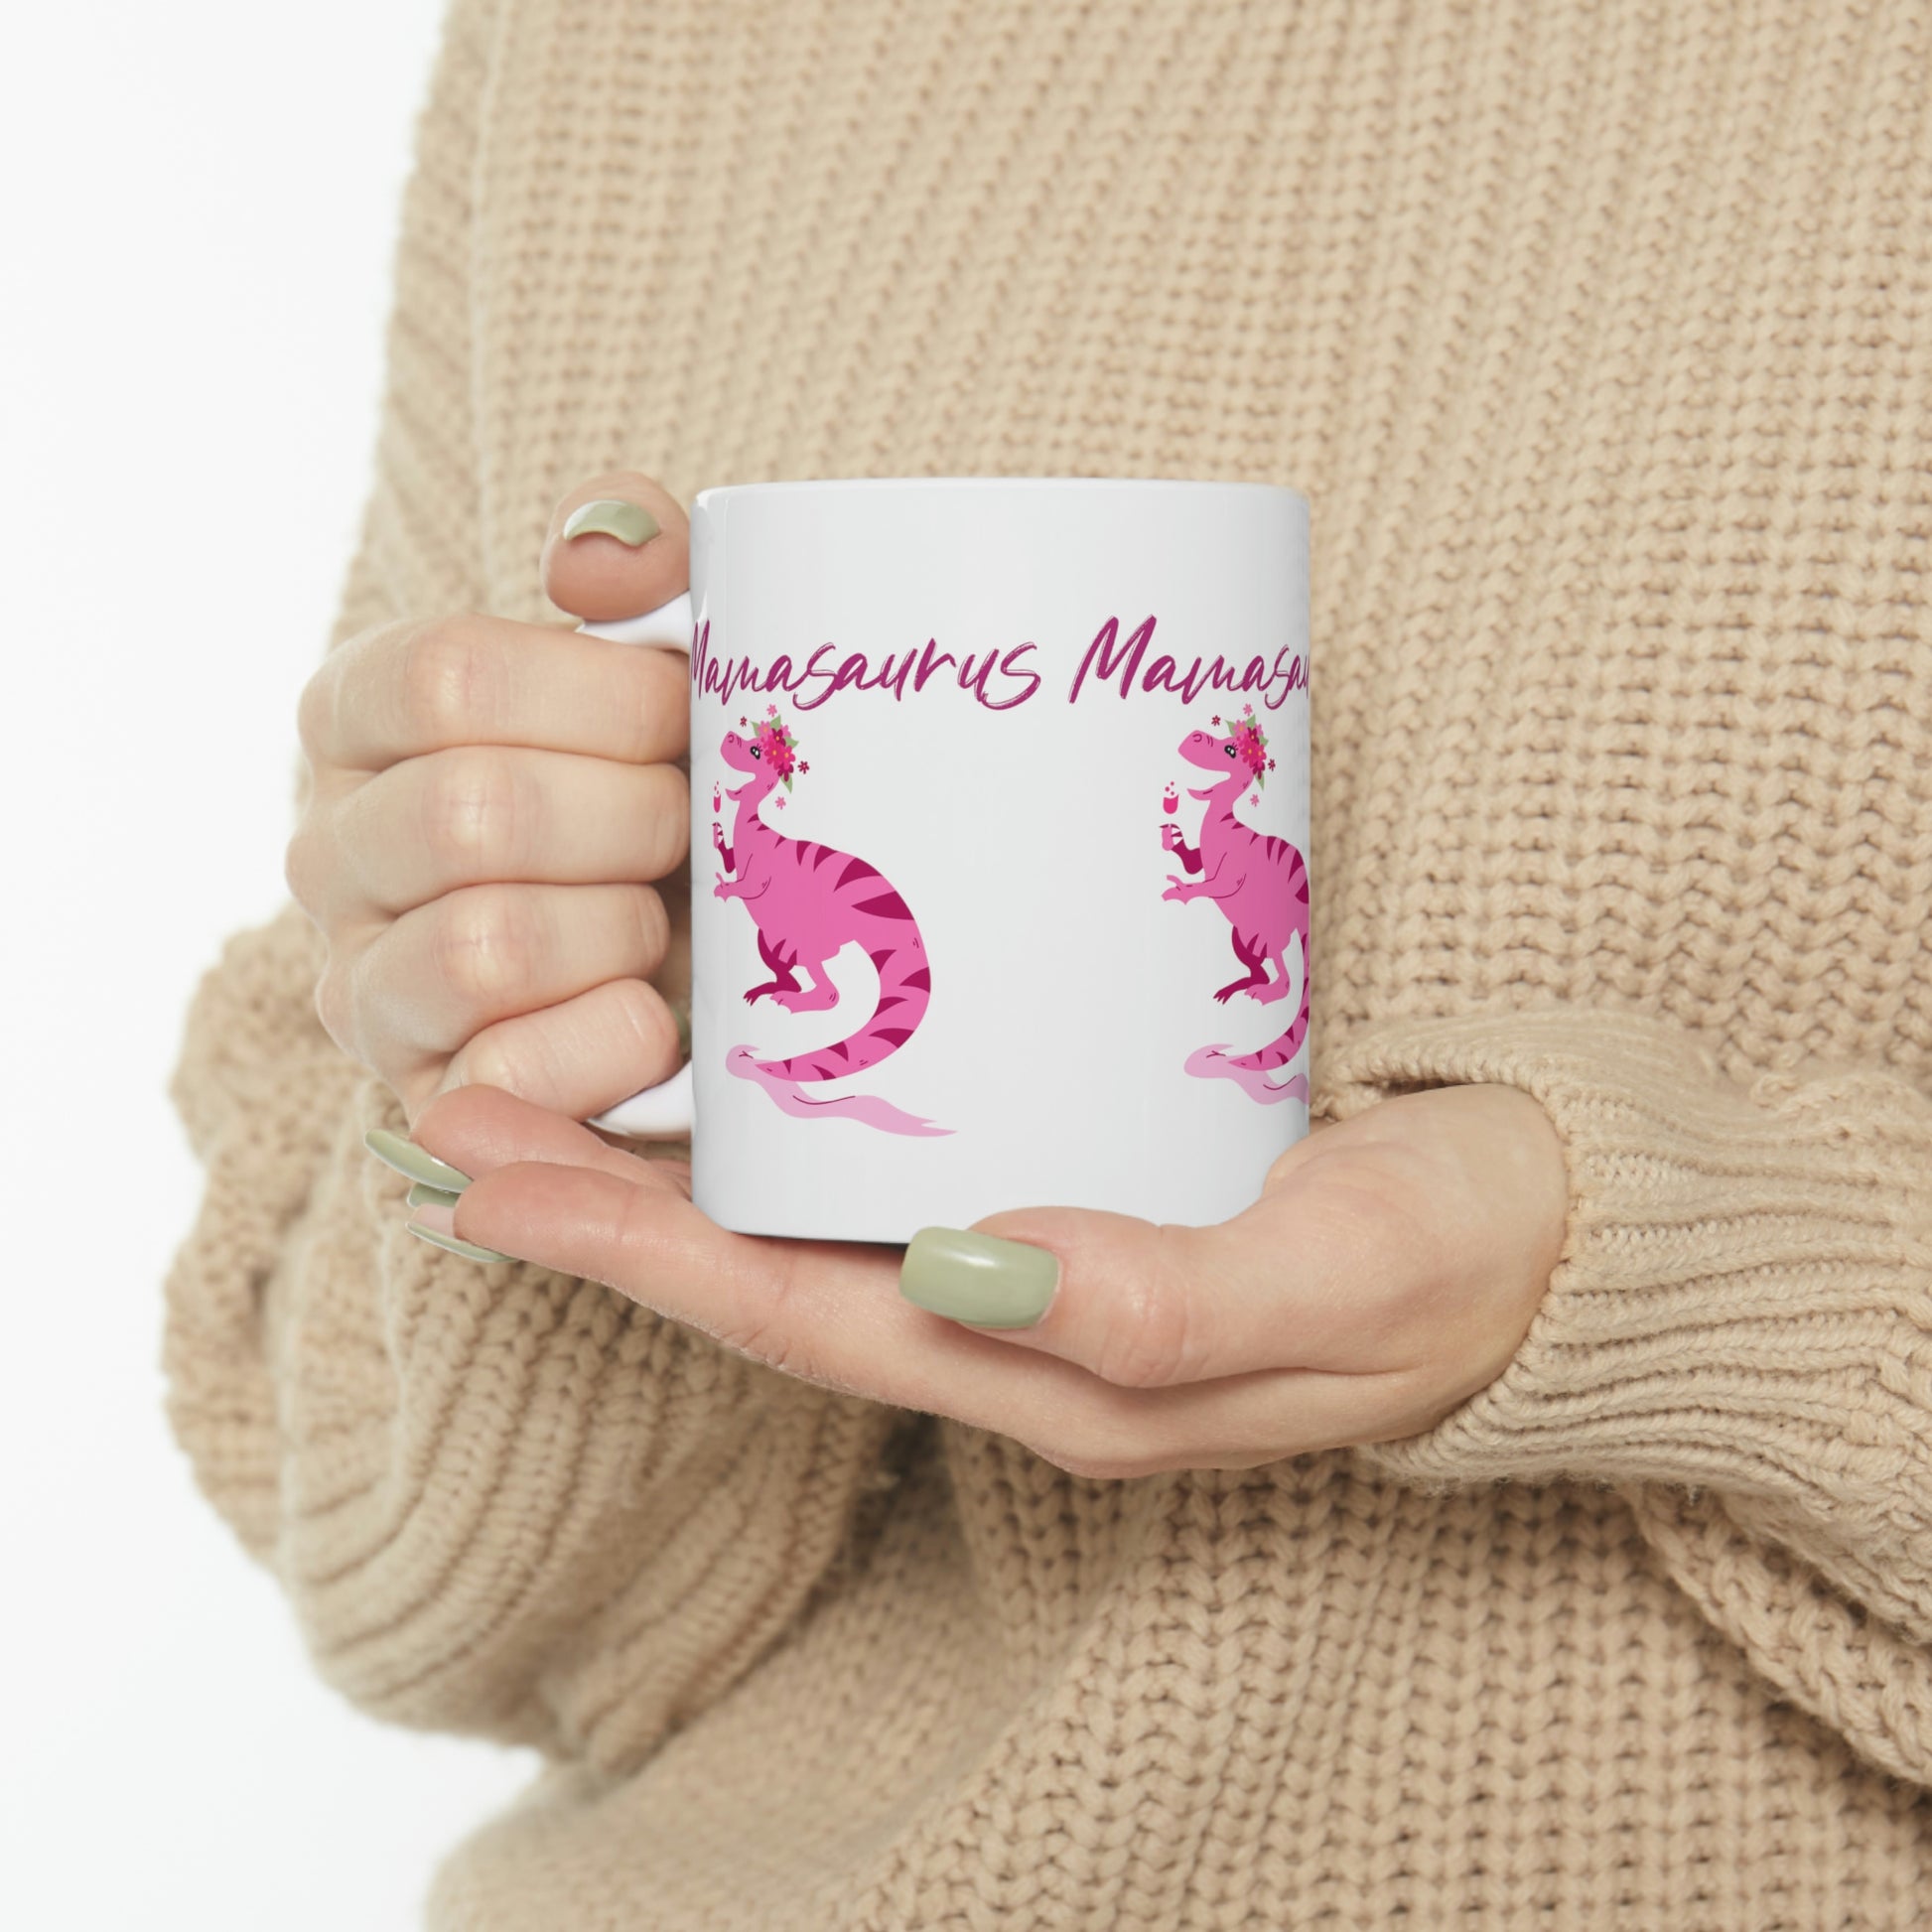 Mock up of the mug being held by a woman wearing a sweater